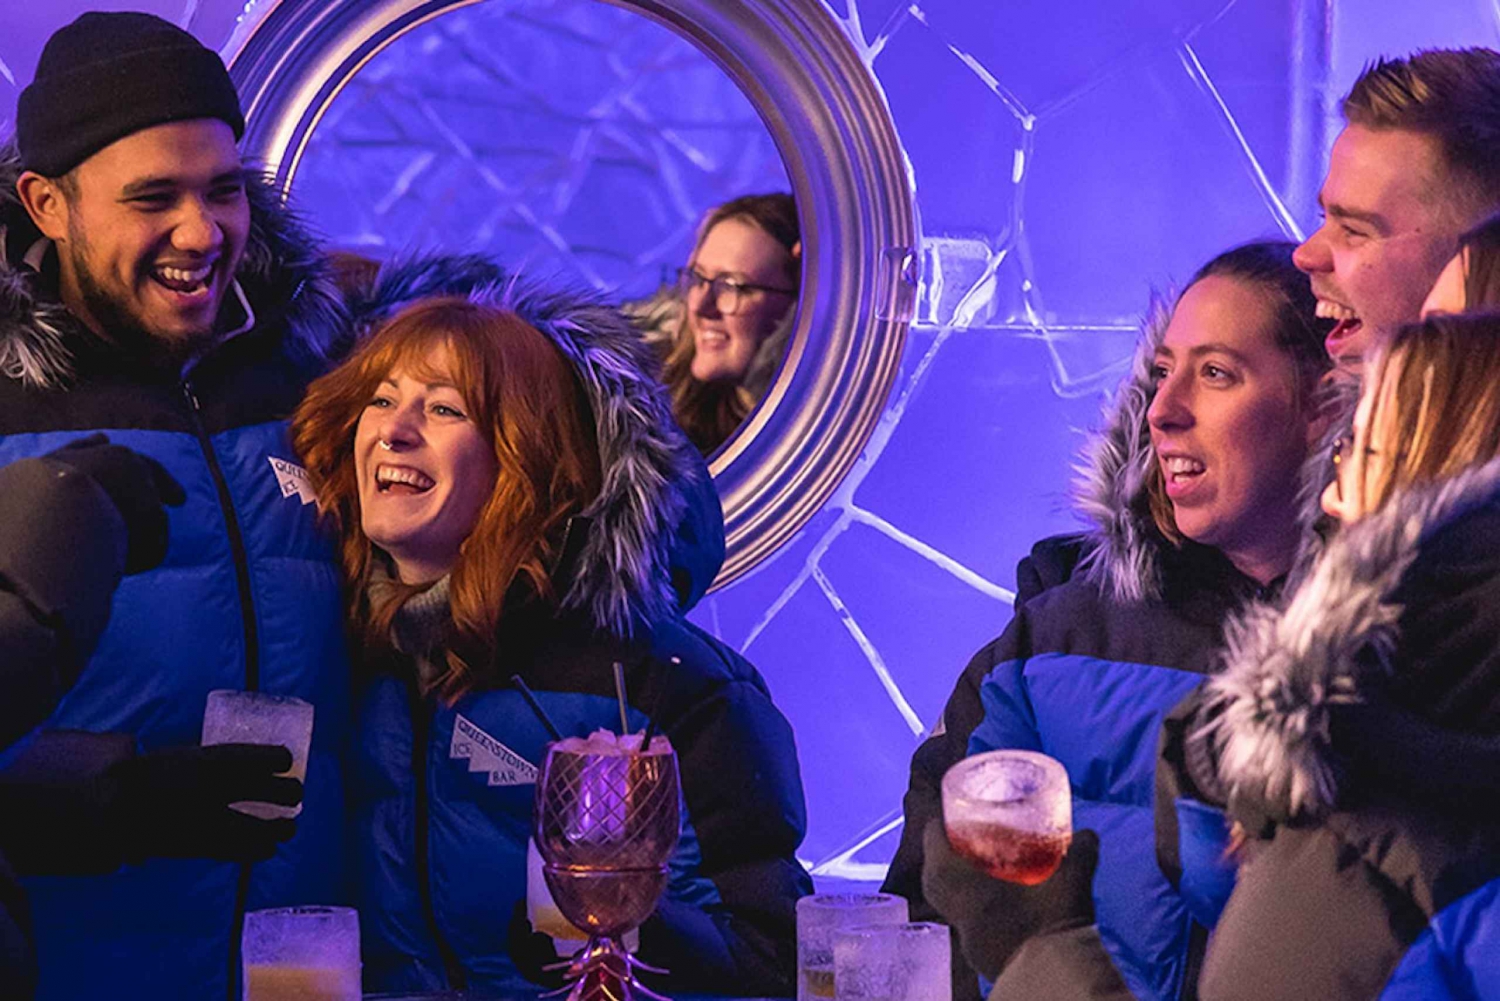 Queenstown Ice Bar: Ice Lounge Premium Entry with Drink